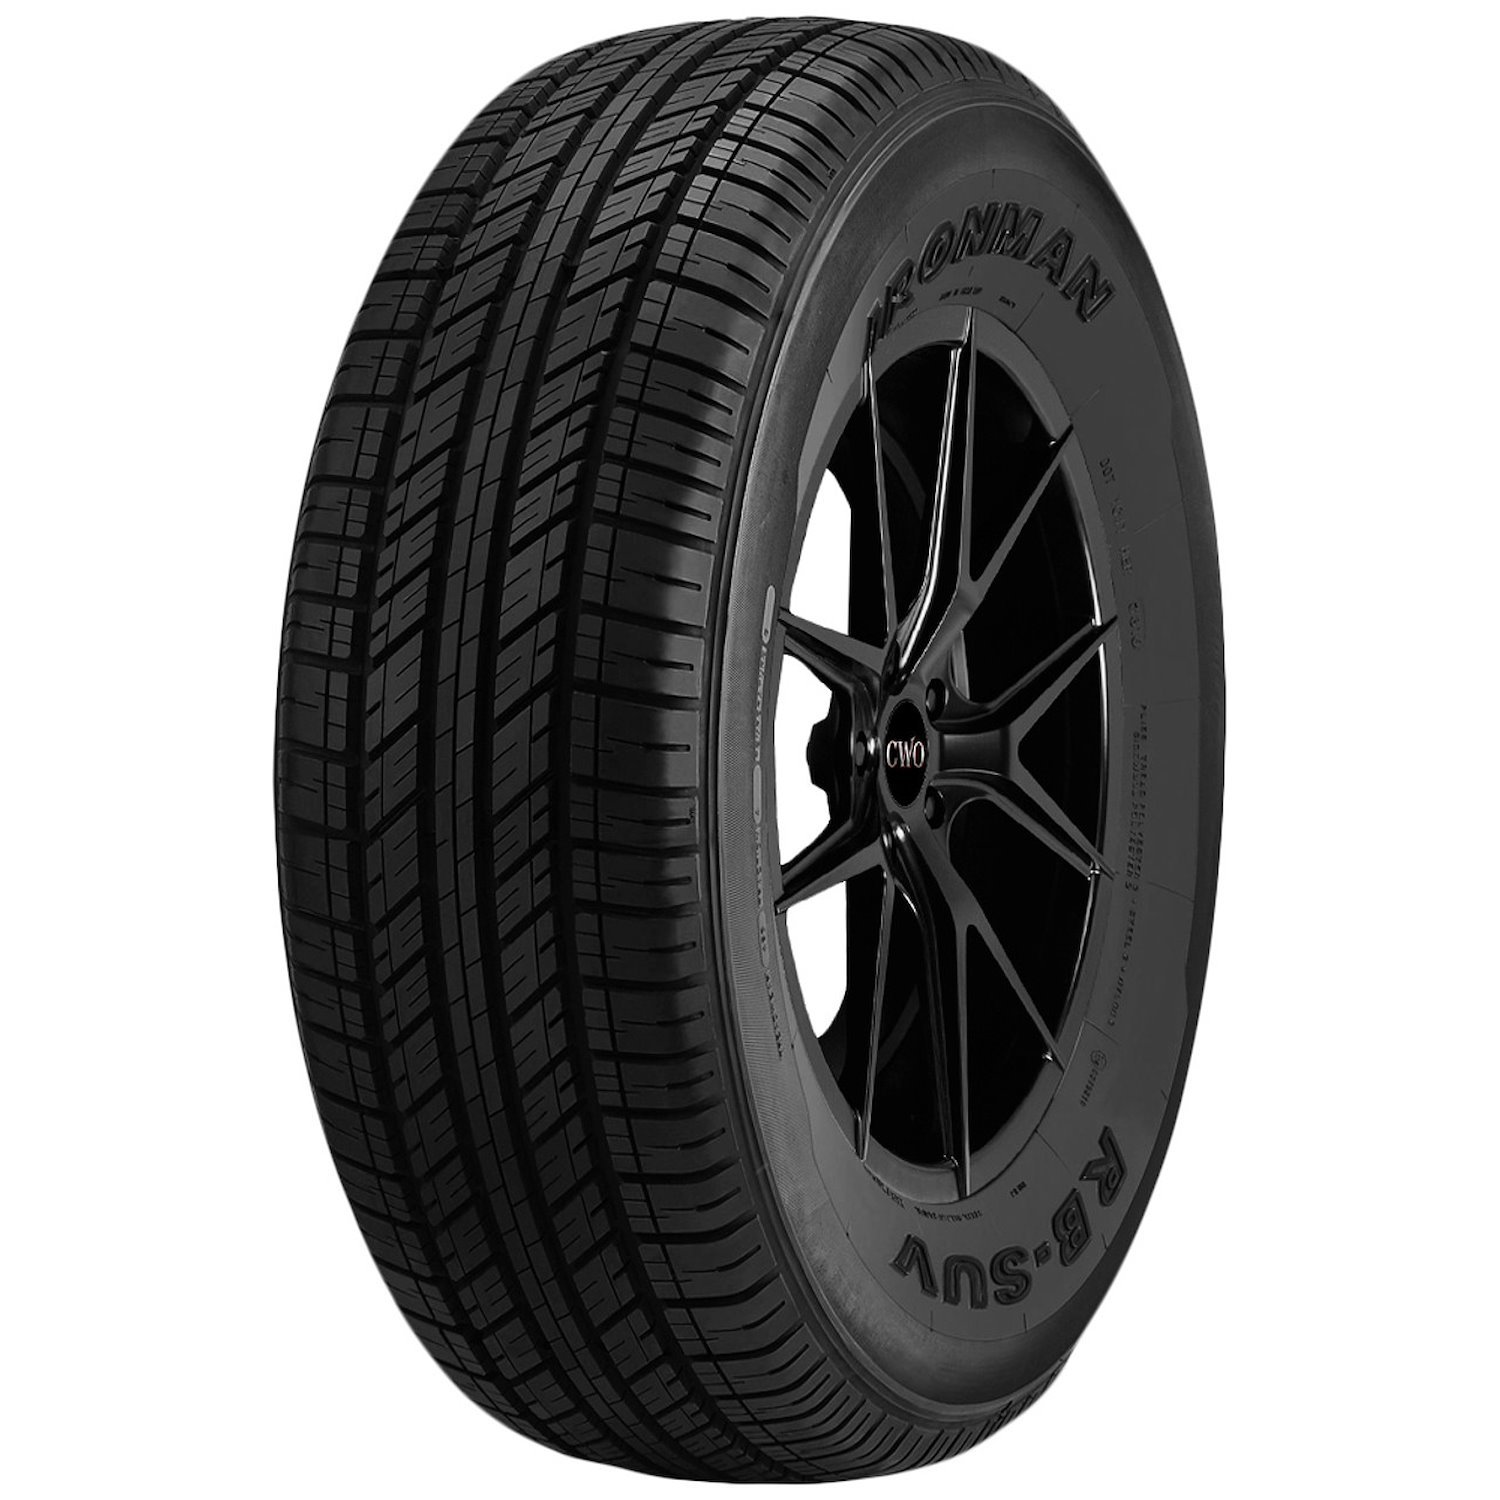 RB SUV Tire, 235/55R20 102H